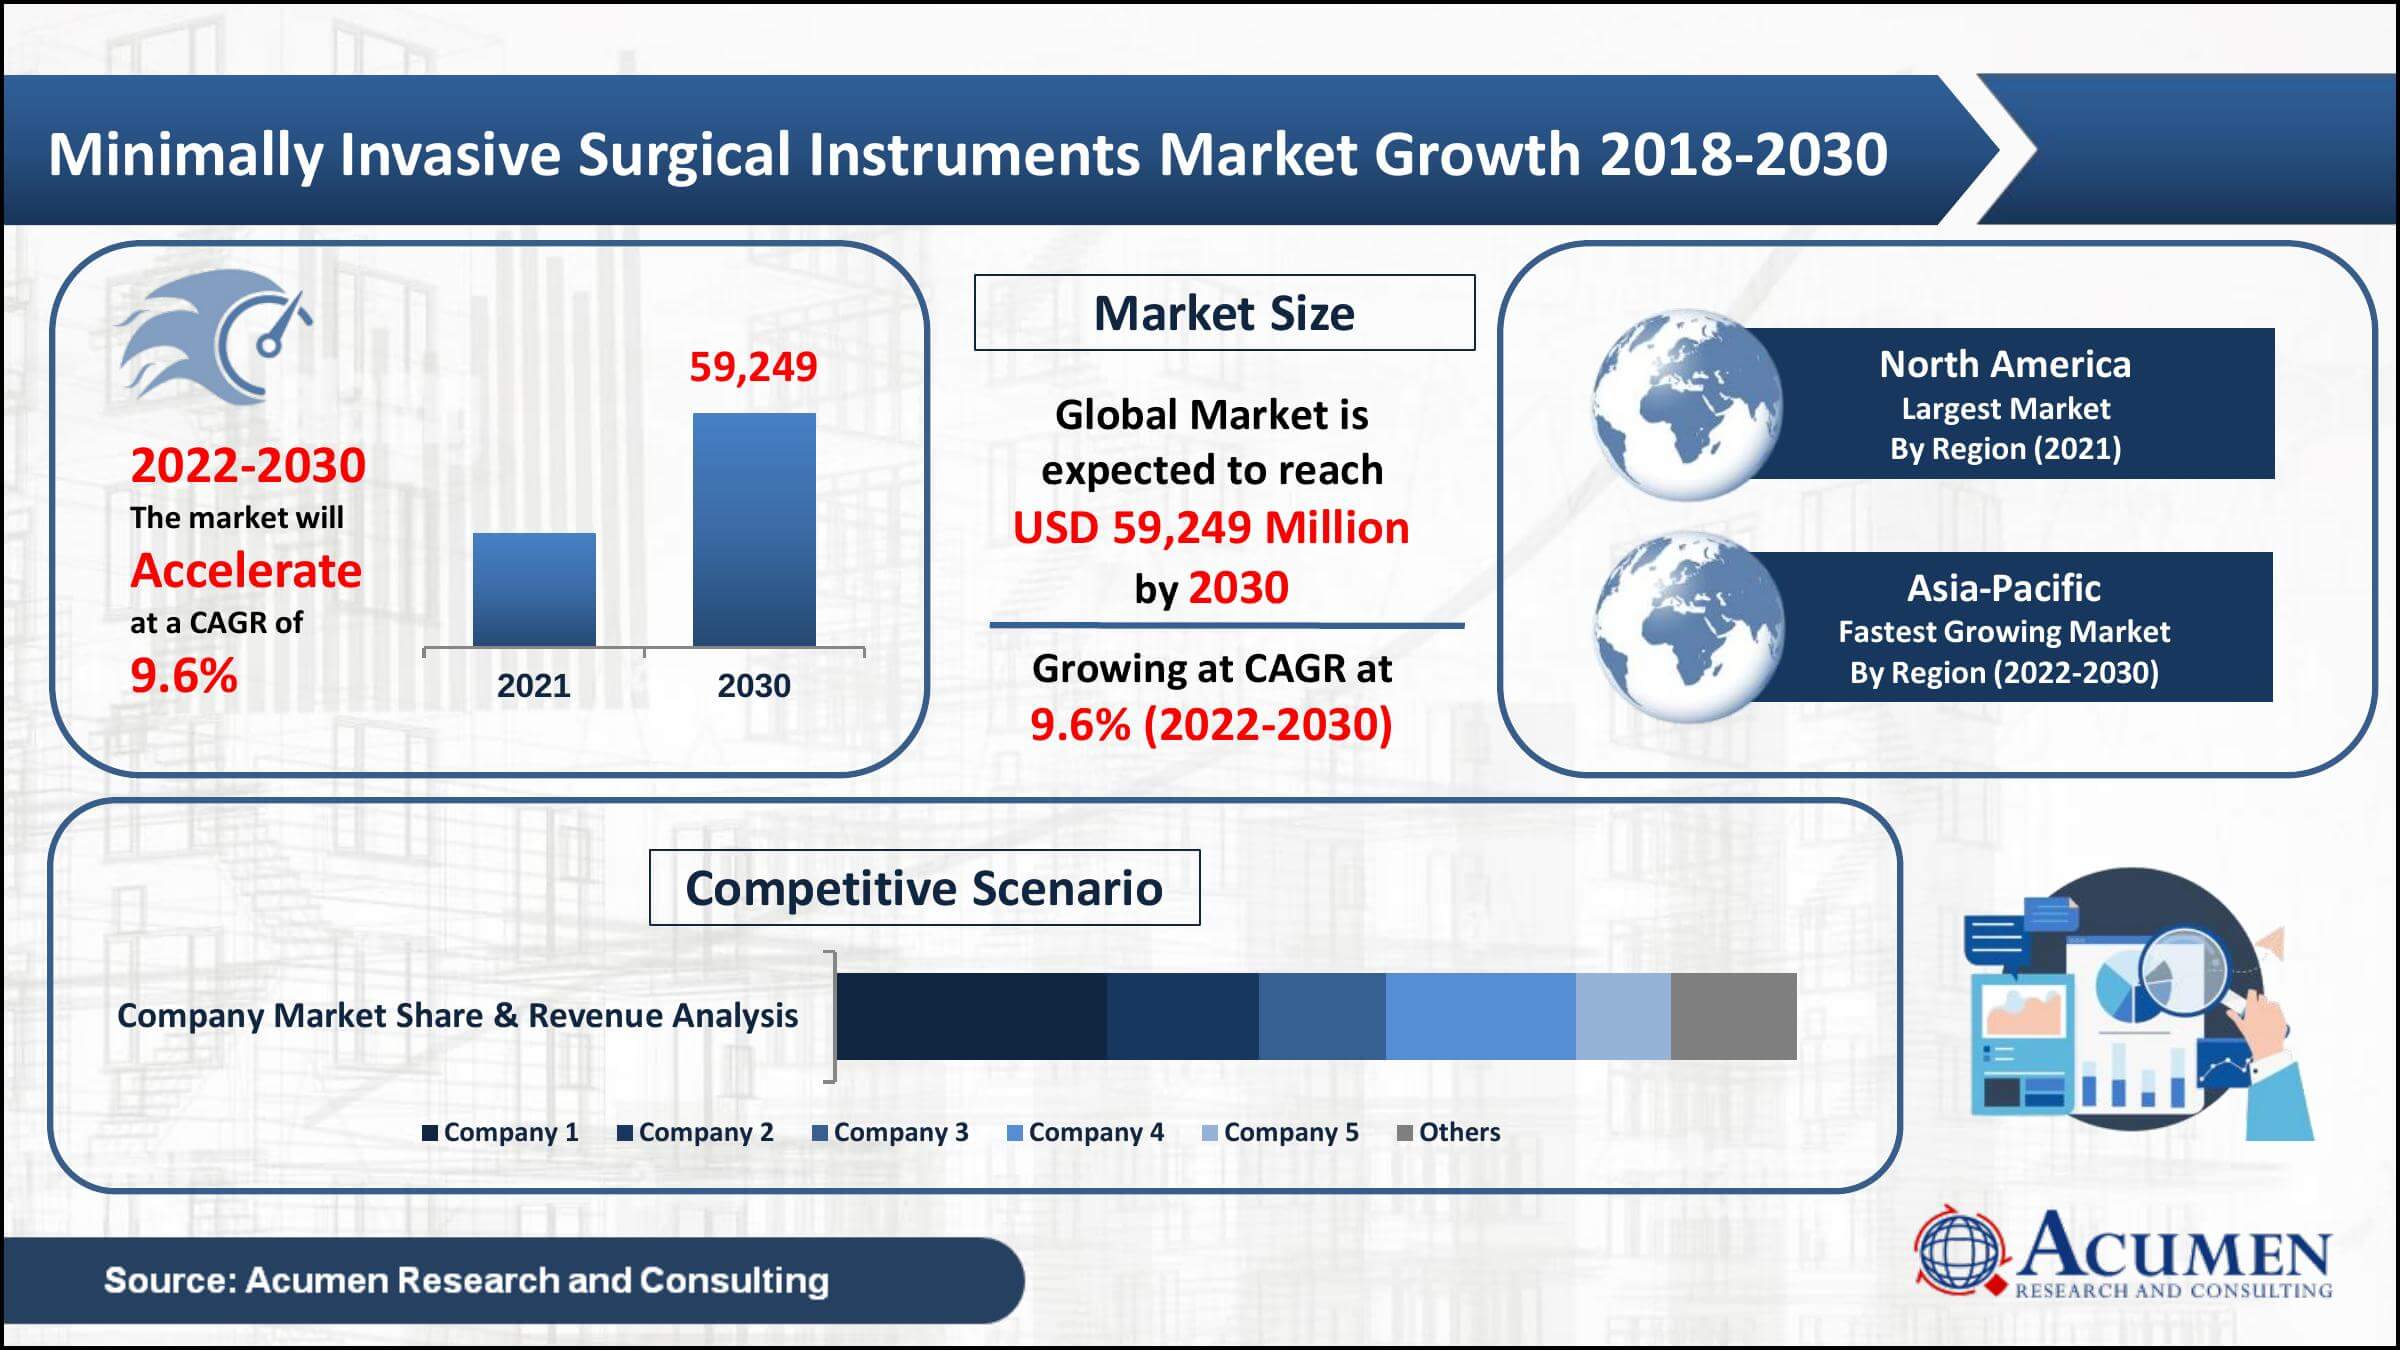 Global minimally invasive surgical instruments market revenue collected USD 26,486 Million in 2021, with a 9.6% CAGR between 2022 and 2030